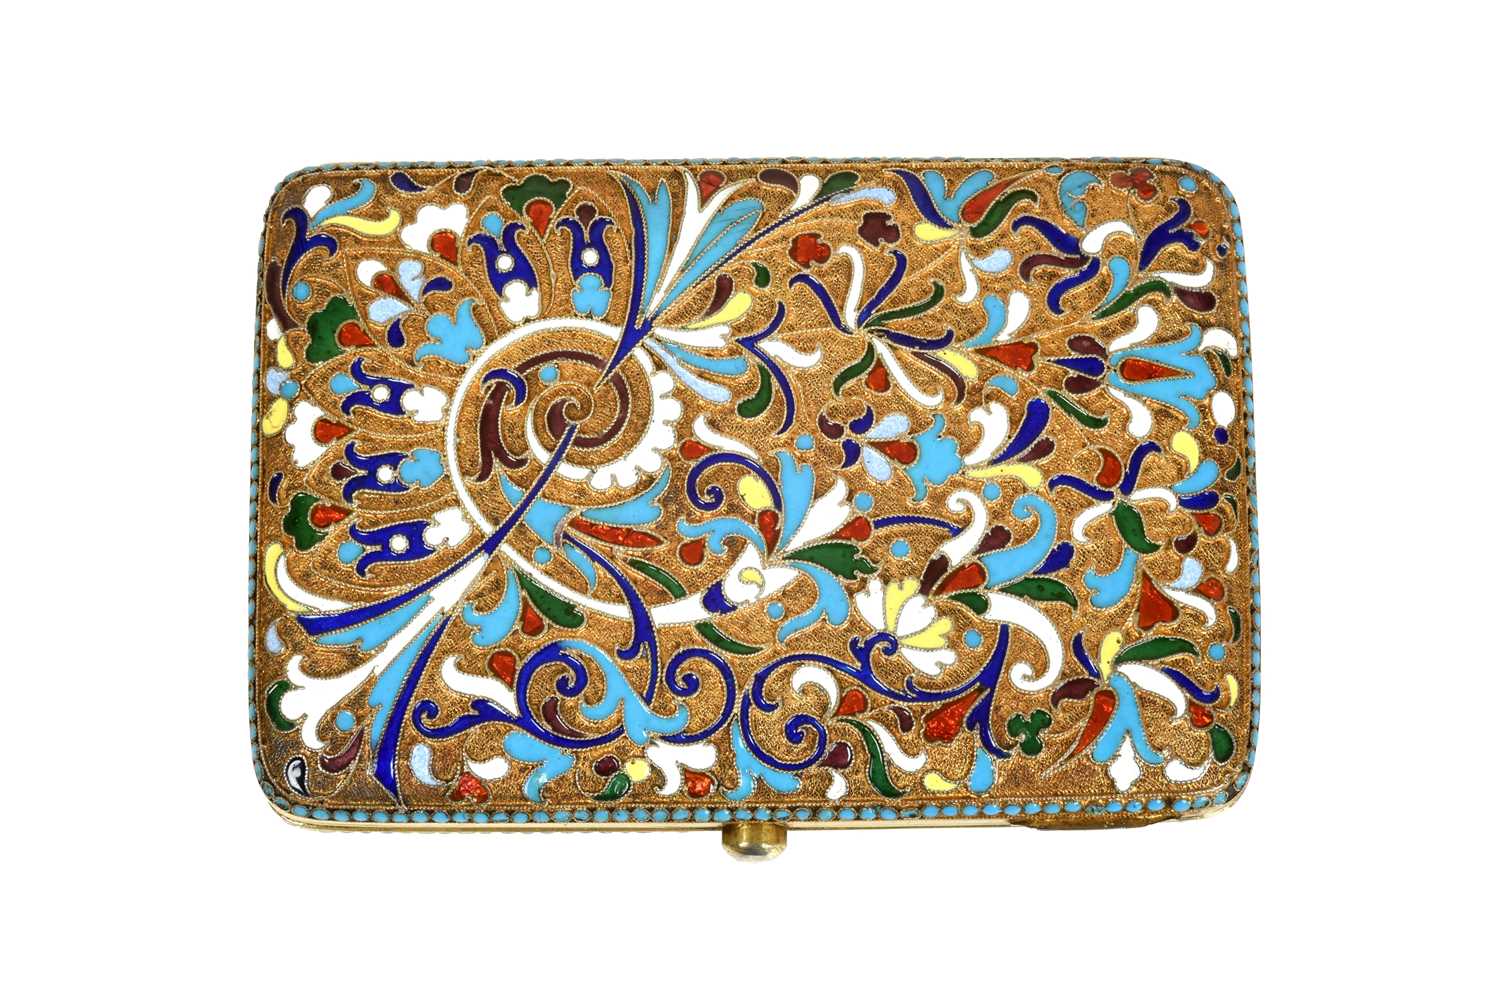 A Russian Silver-Gilt and Enamel Cigarette-Case, by Nicholai Zugeryev, Moscow, 1898-1914, Assay Mas